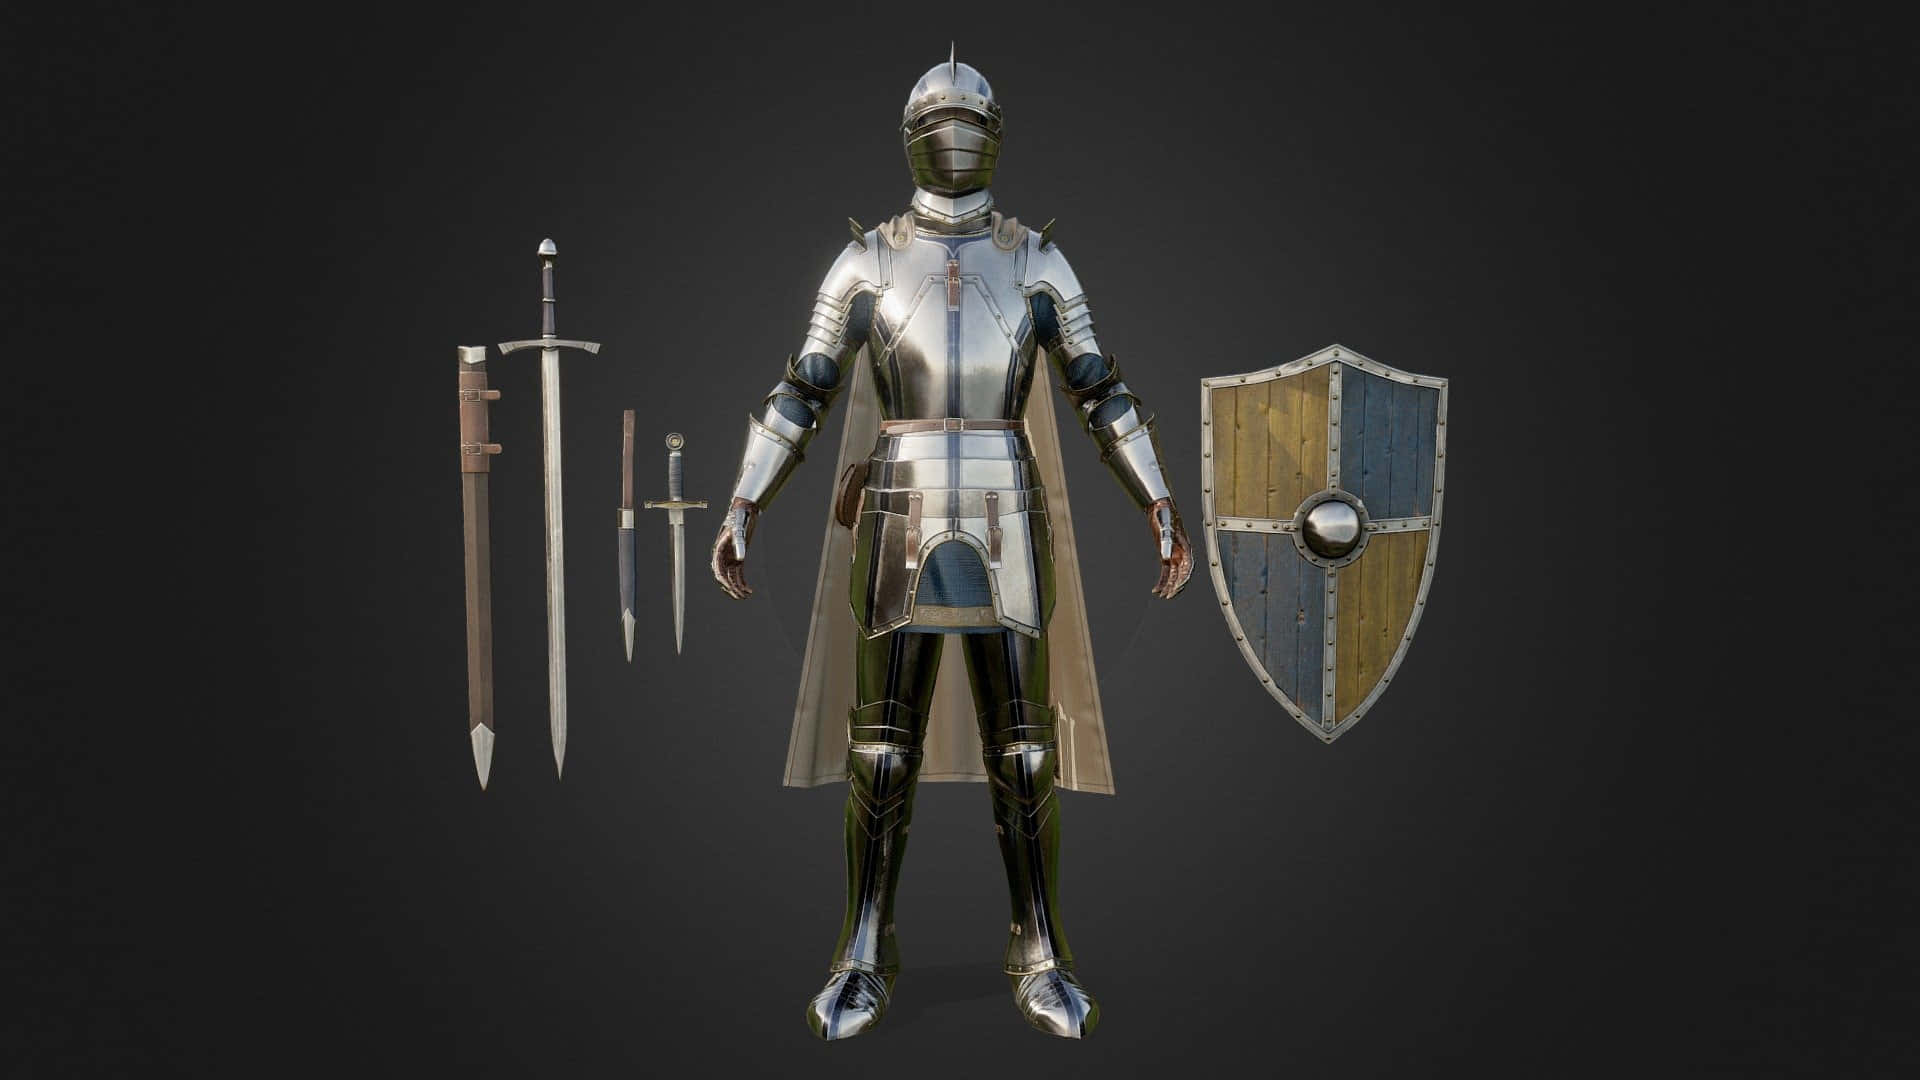 Get an edge in the game of Mordhau with the Best Mordhau Equipment